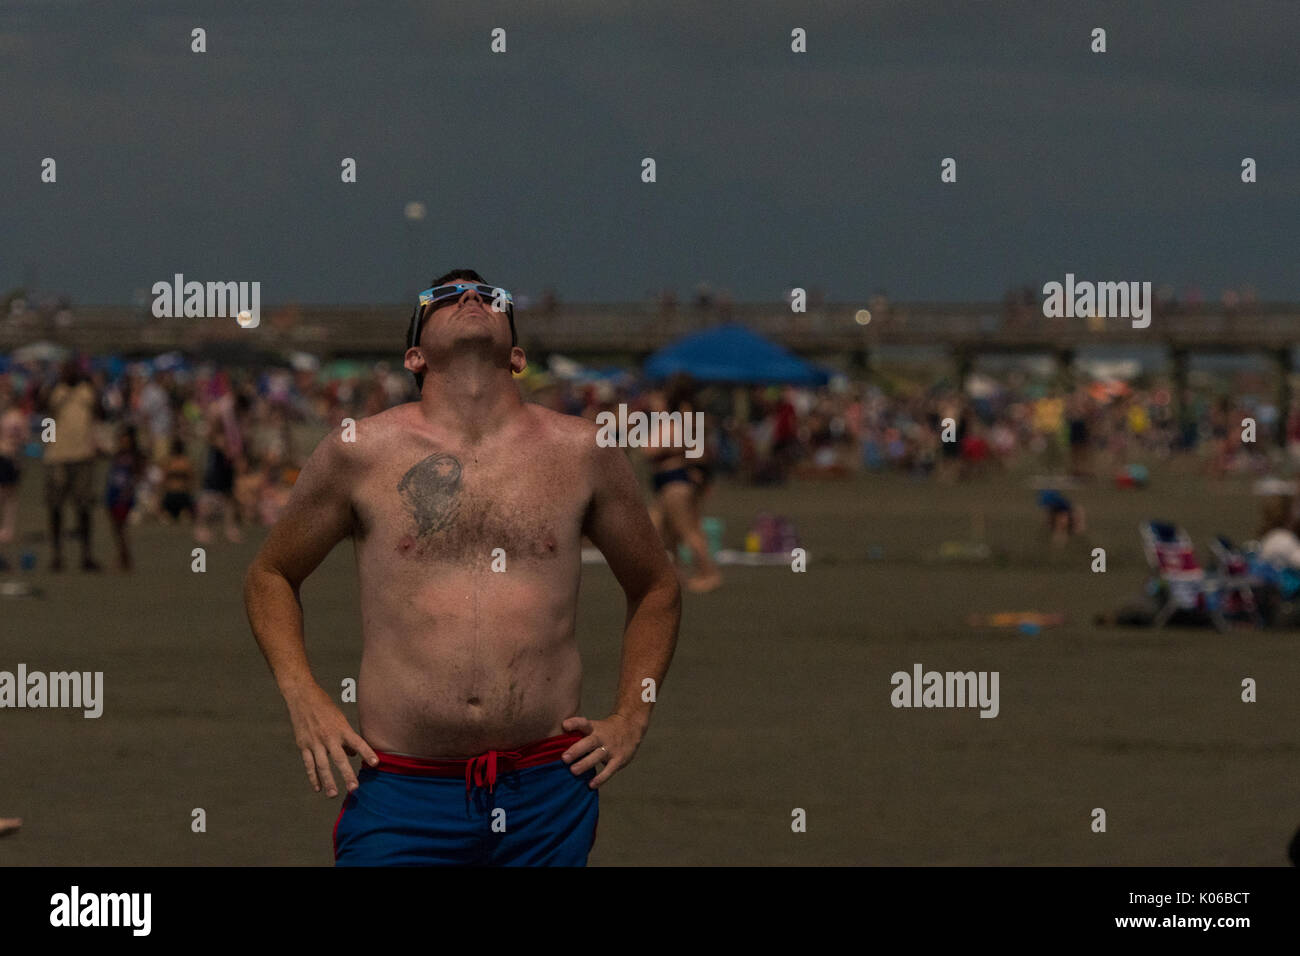 Charleston, Isle of Palms, USA. 21st Aug, 2017. Darkness takes over the day as the solar eclipse reaches totality as spectators watch on the beach outside Charleston August 21, 2017 in Isle of Palms, South Carolina. The solar eclipse after sweeping across the nation crosses the Charleston area before heading over the Atlantic Ocean. Credit: Planetpix/Alamy Live News Stock Photo